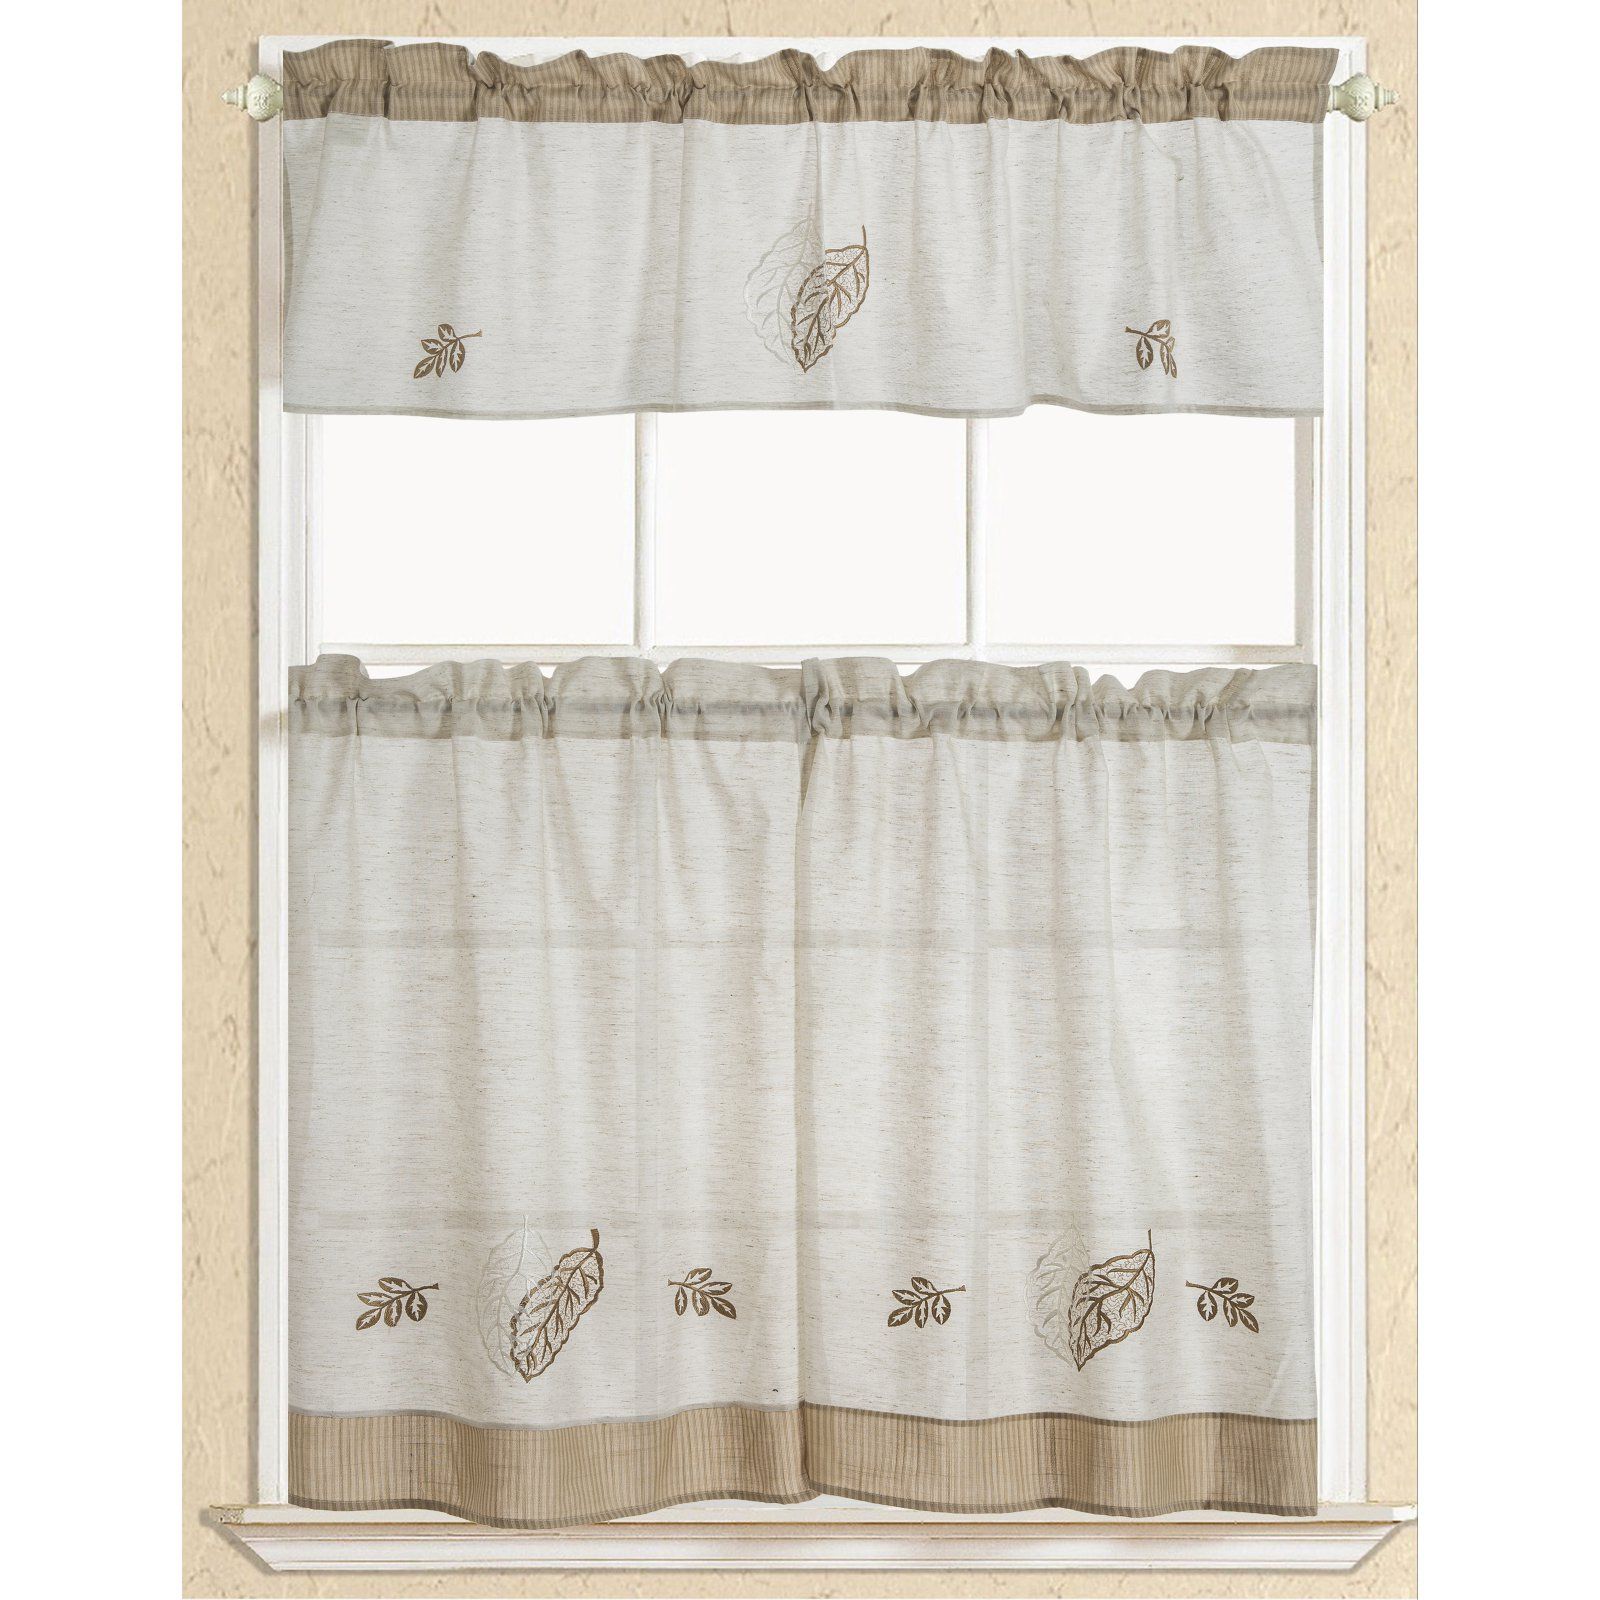 Rt Designers Collection Rustic Embroidered Leaf Kitchen Intended For Imperial Flower Jacquard Tier And Valance Kitchen Curtain Sets (View 3 of 20)